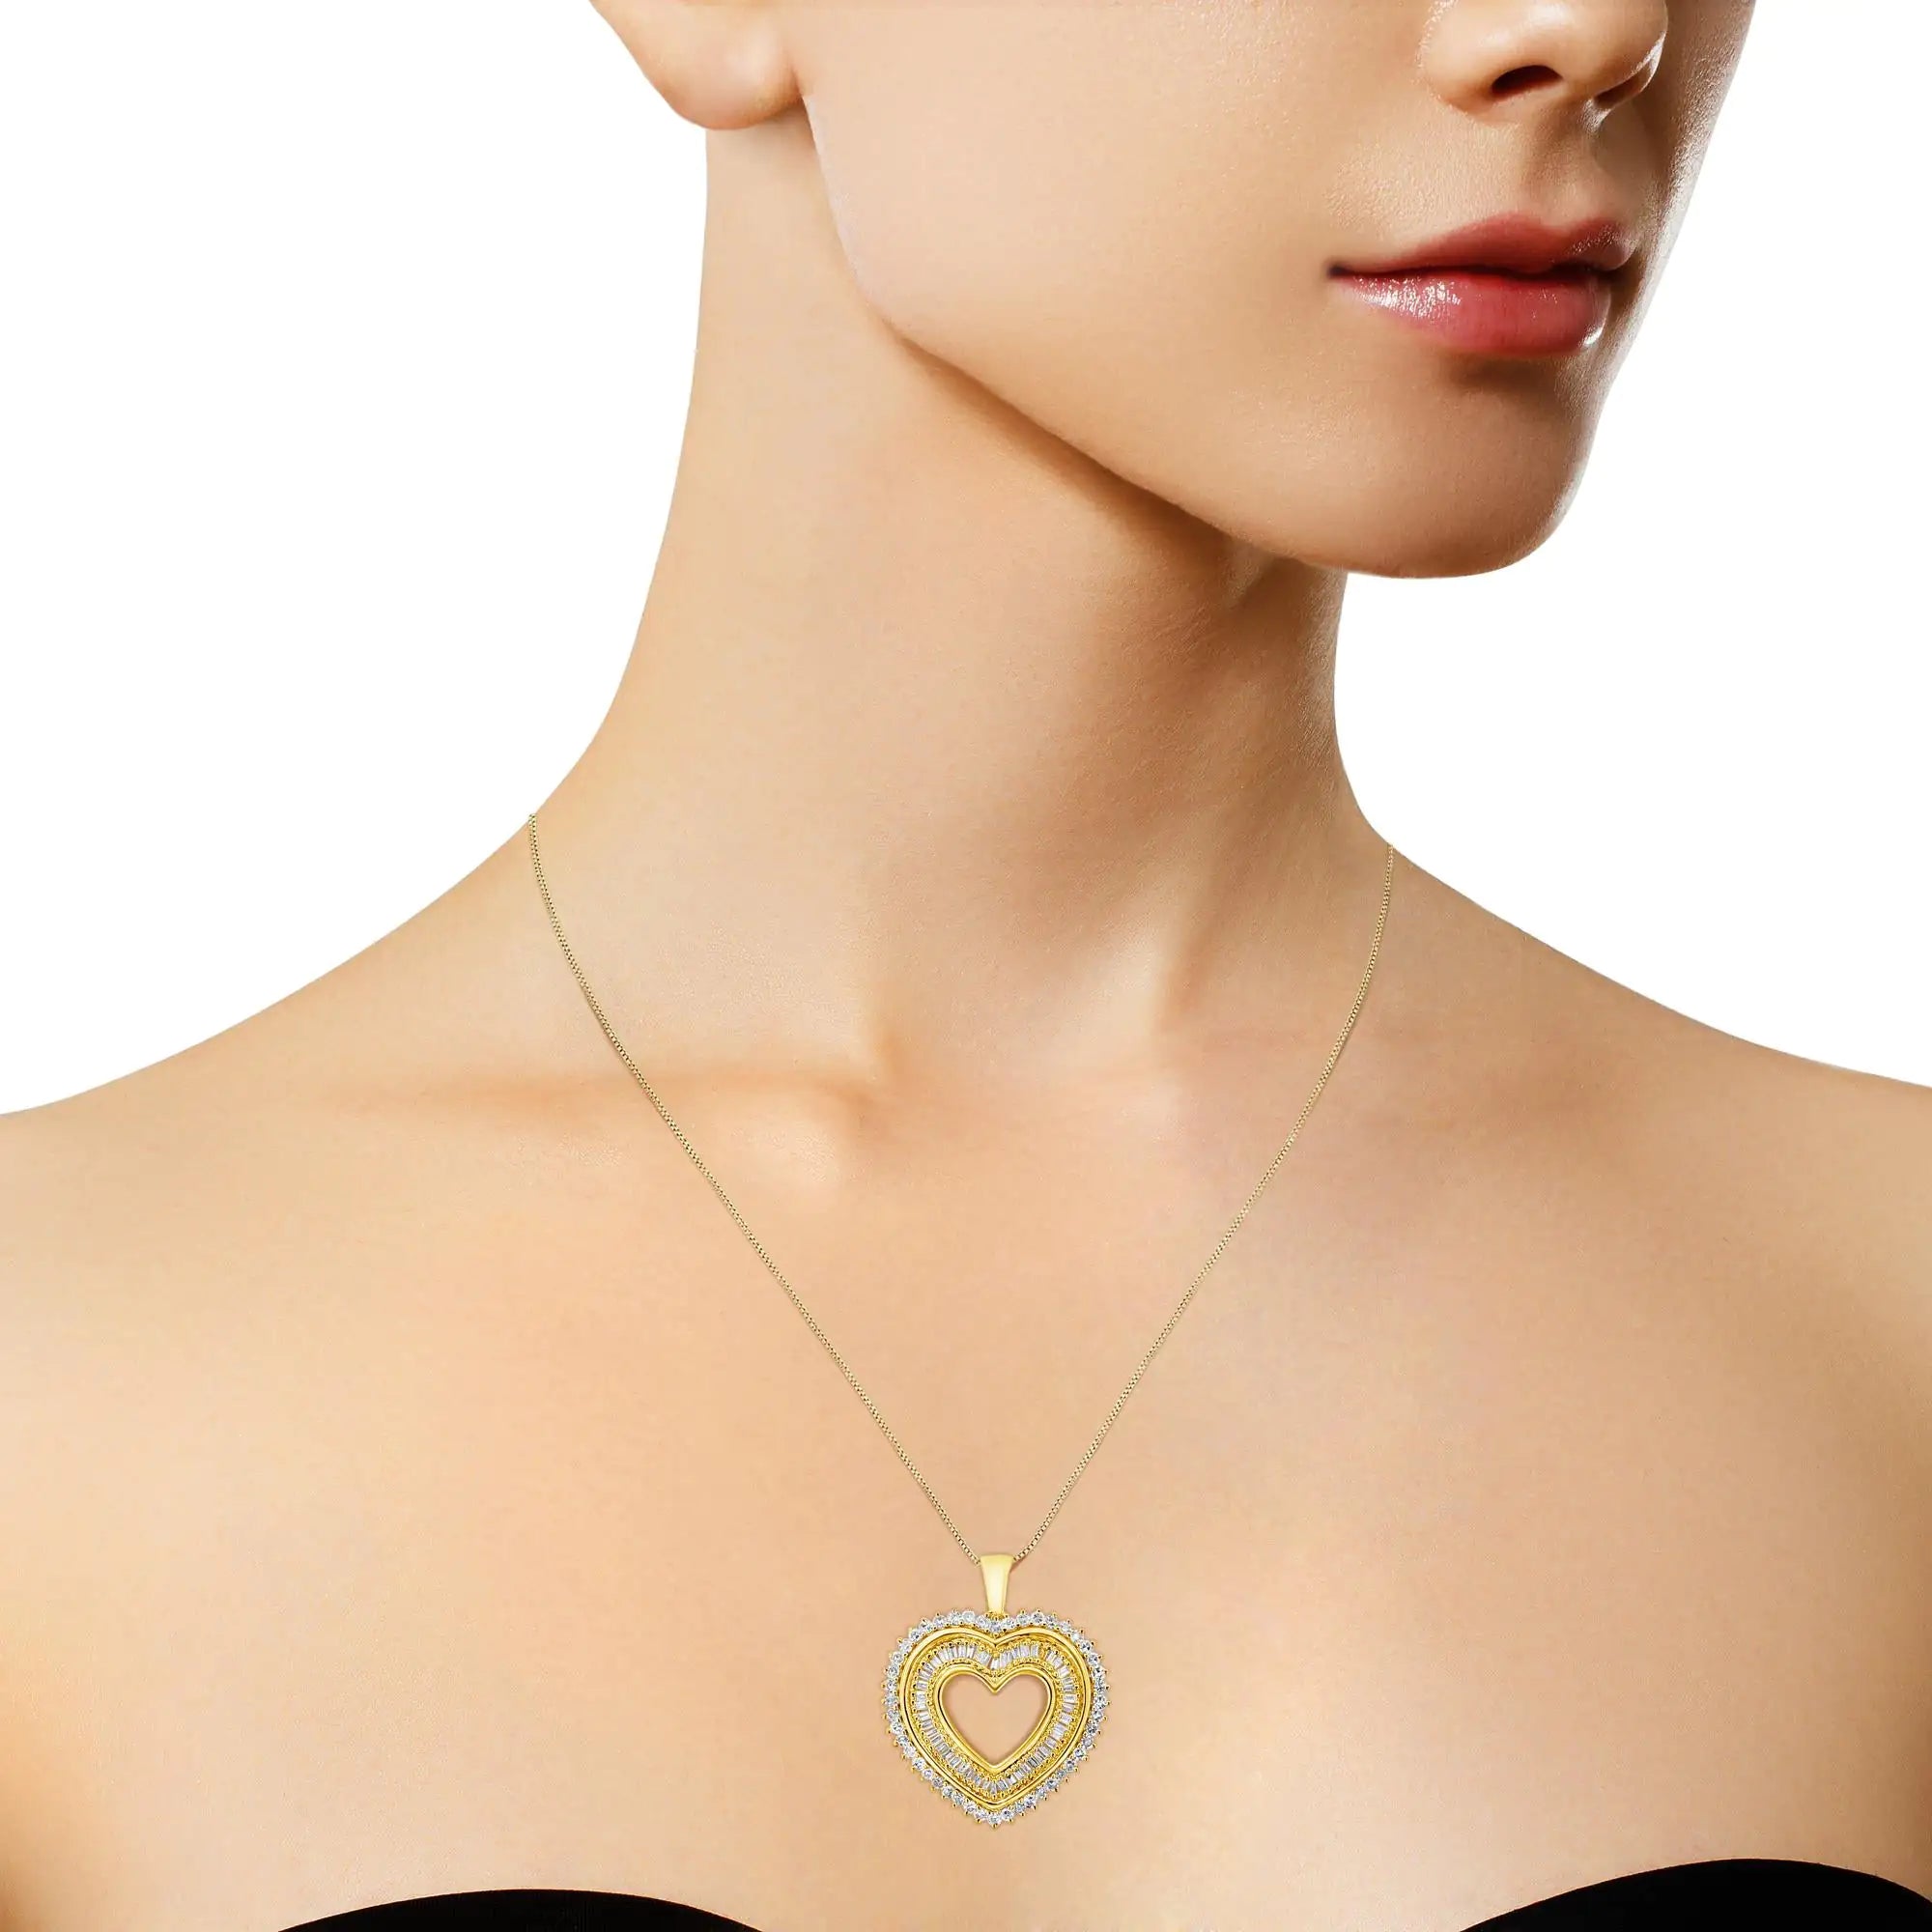 14K Yellow Gold Plated .925 Sterling Silver 1.0 Cttw Round and Baguette-Cut Diamond Composite Hearth 18&quot; Pendant Necklace (I-J Color, I1-I2 Clarity)